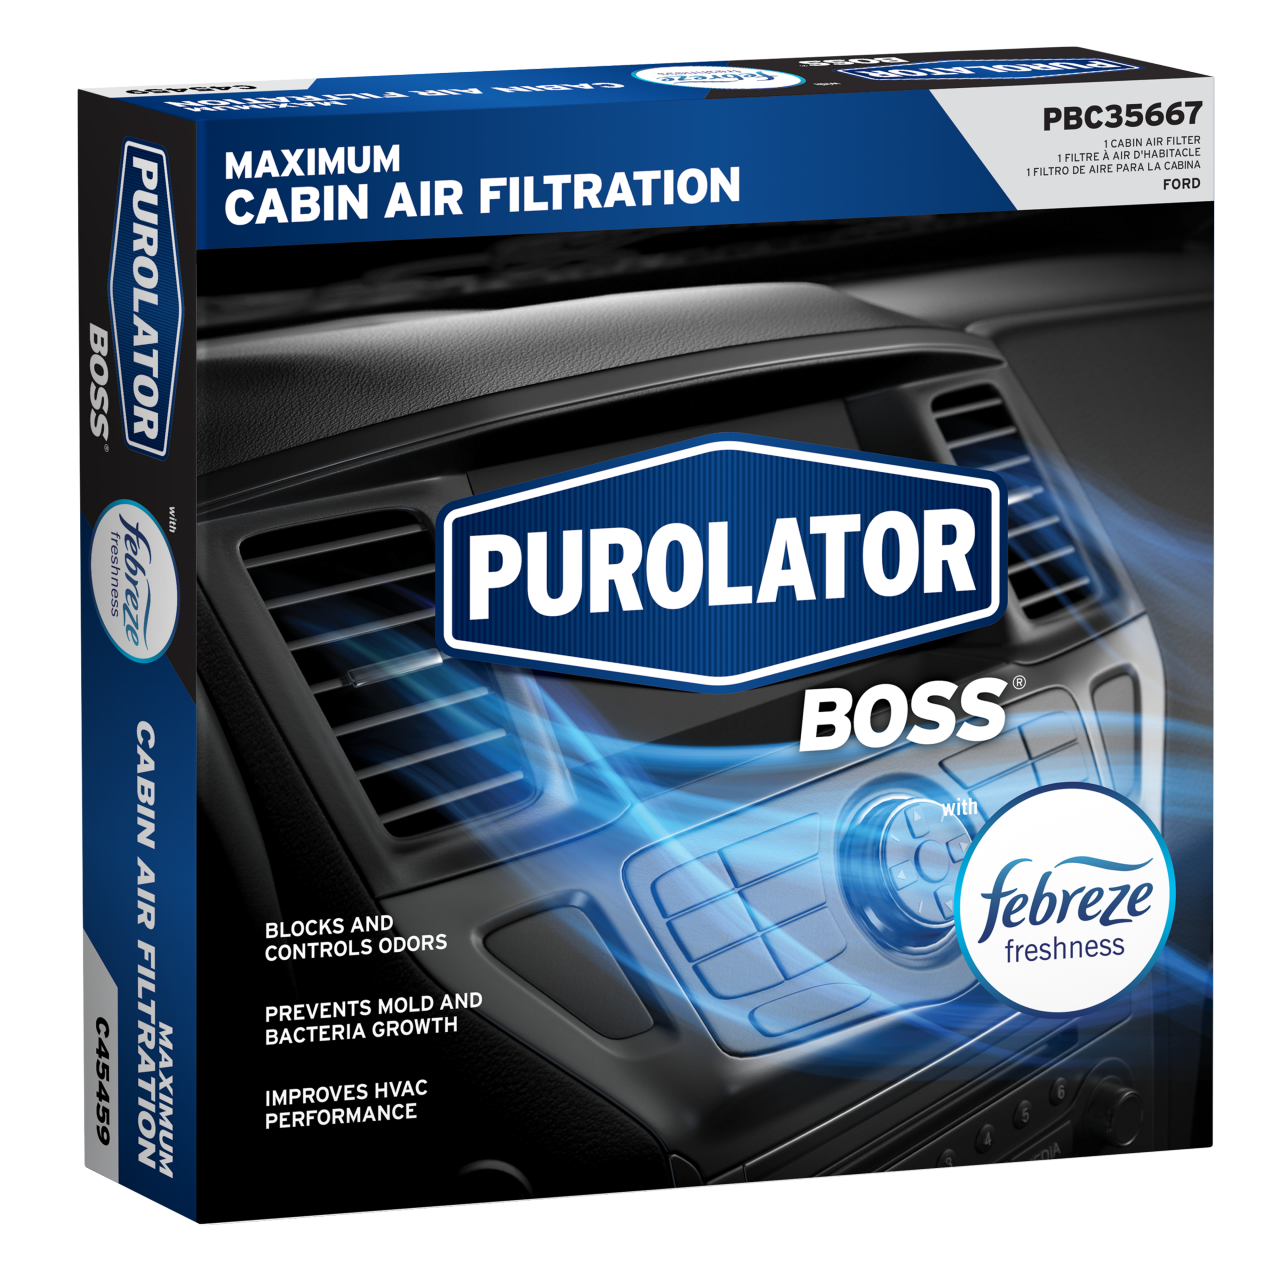 Purolator and Move Clean collaborate to incorporate filtration products into Total Vehicle Hygiene program